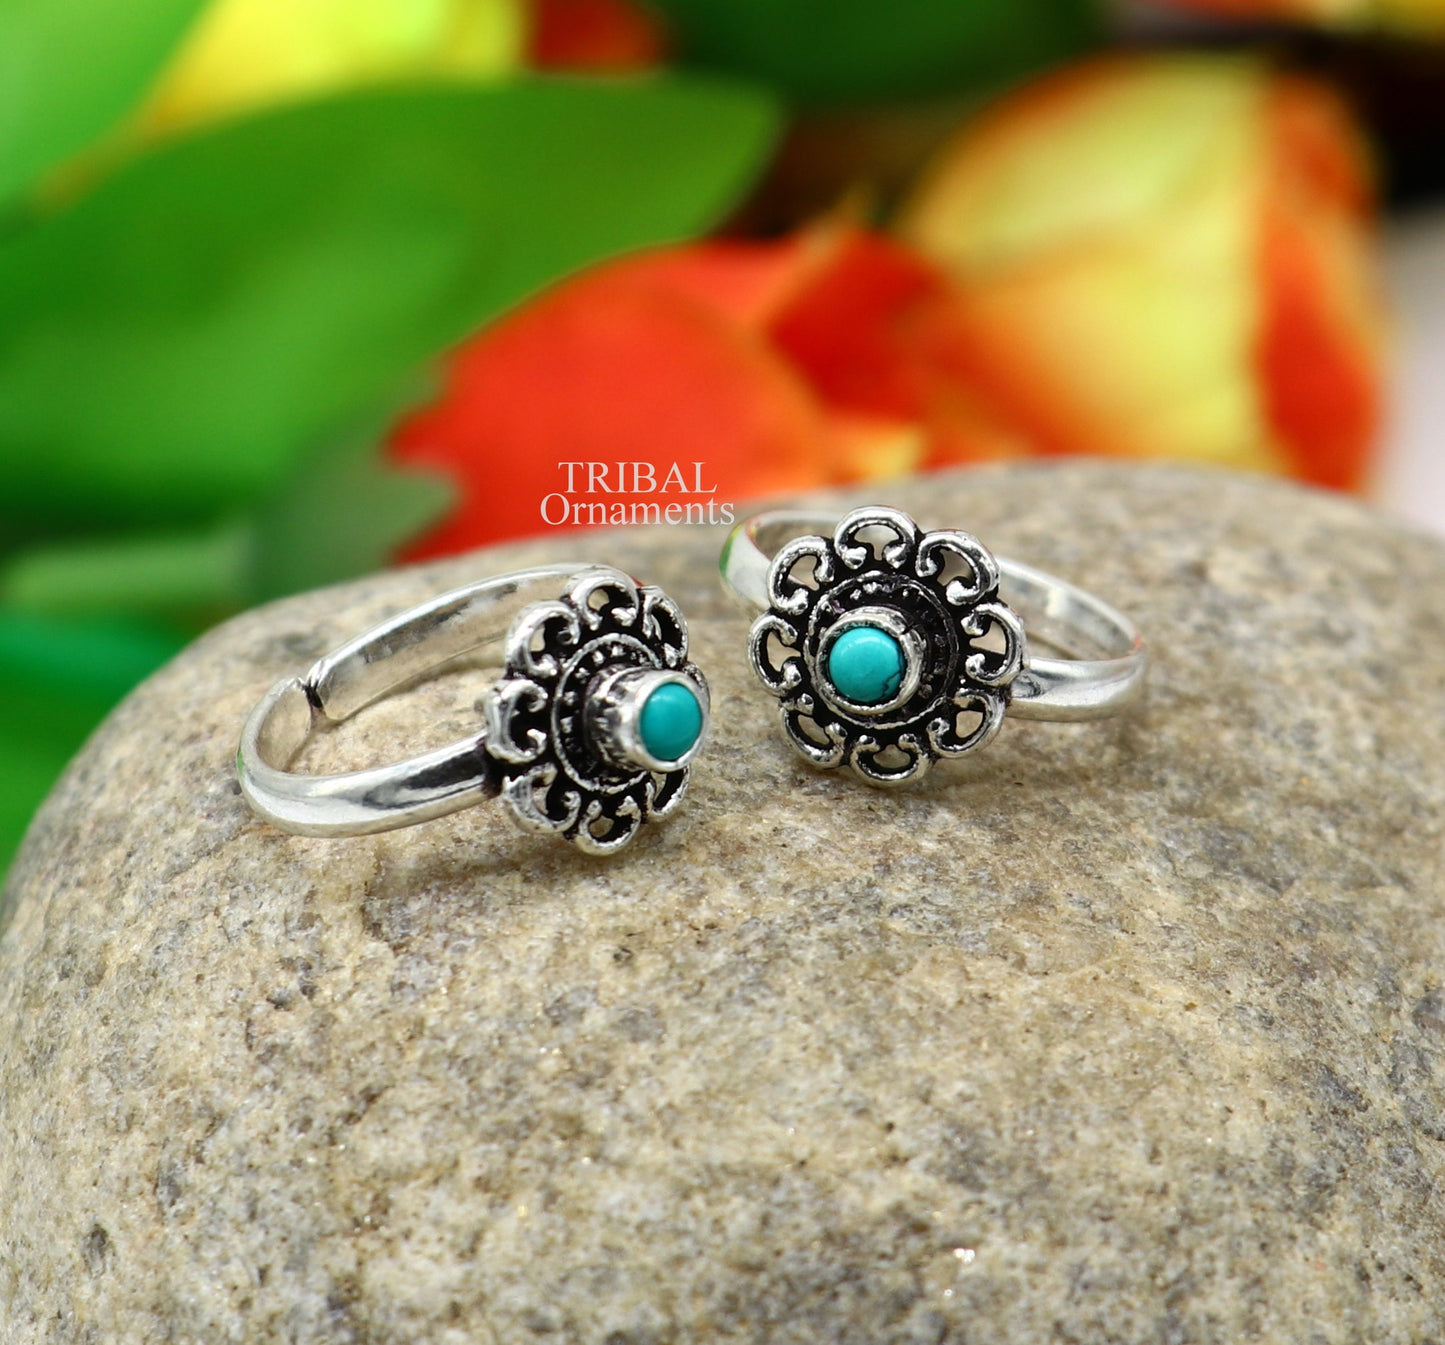 925 sterling silver handmade fabulous tiny toe ring band turquoise stone tribal belly dance vintage style ethnic jewelry from India toer144 - TRIBAL ORNAMENTS